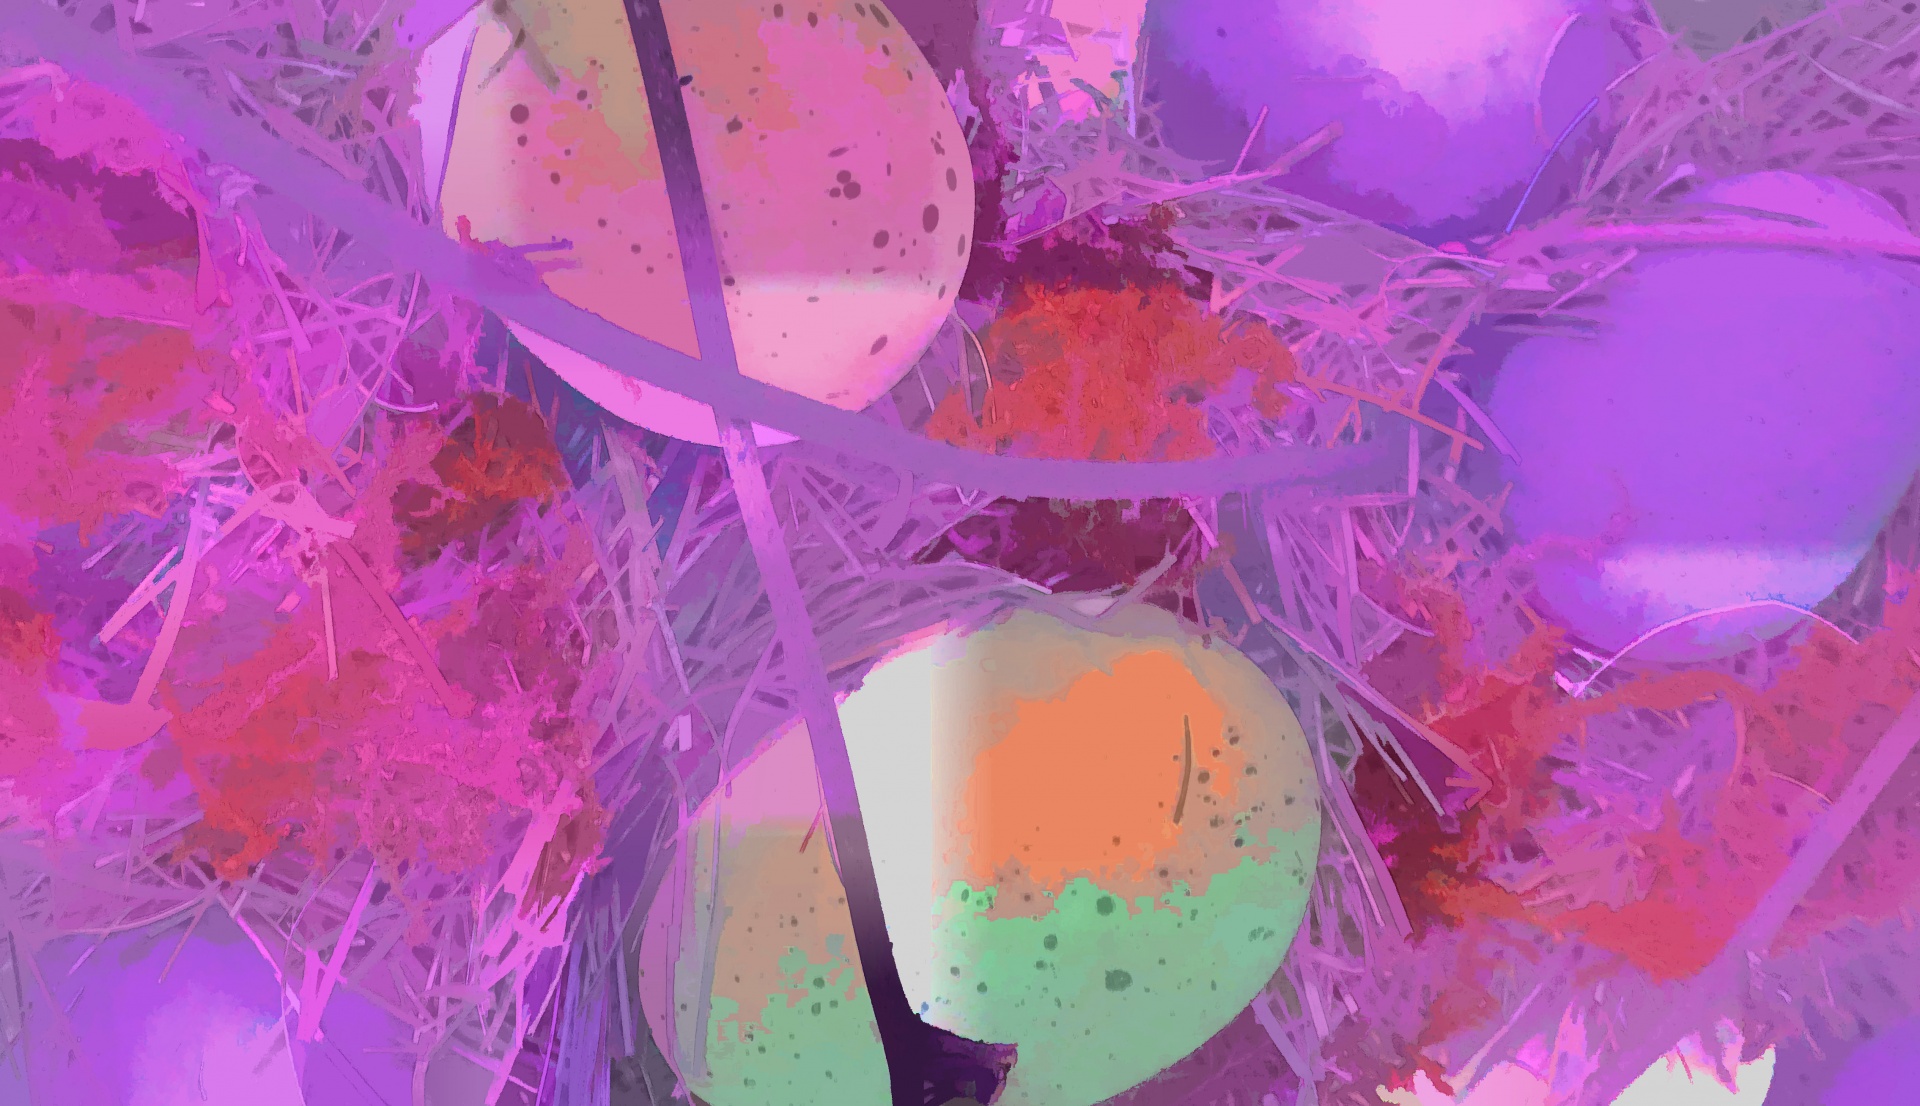 Background Wallpaper Abstract Easter Eggs Image From